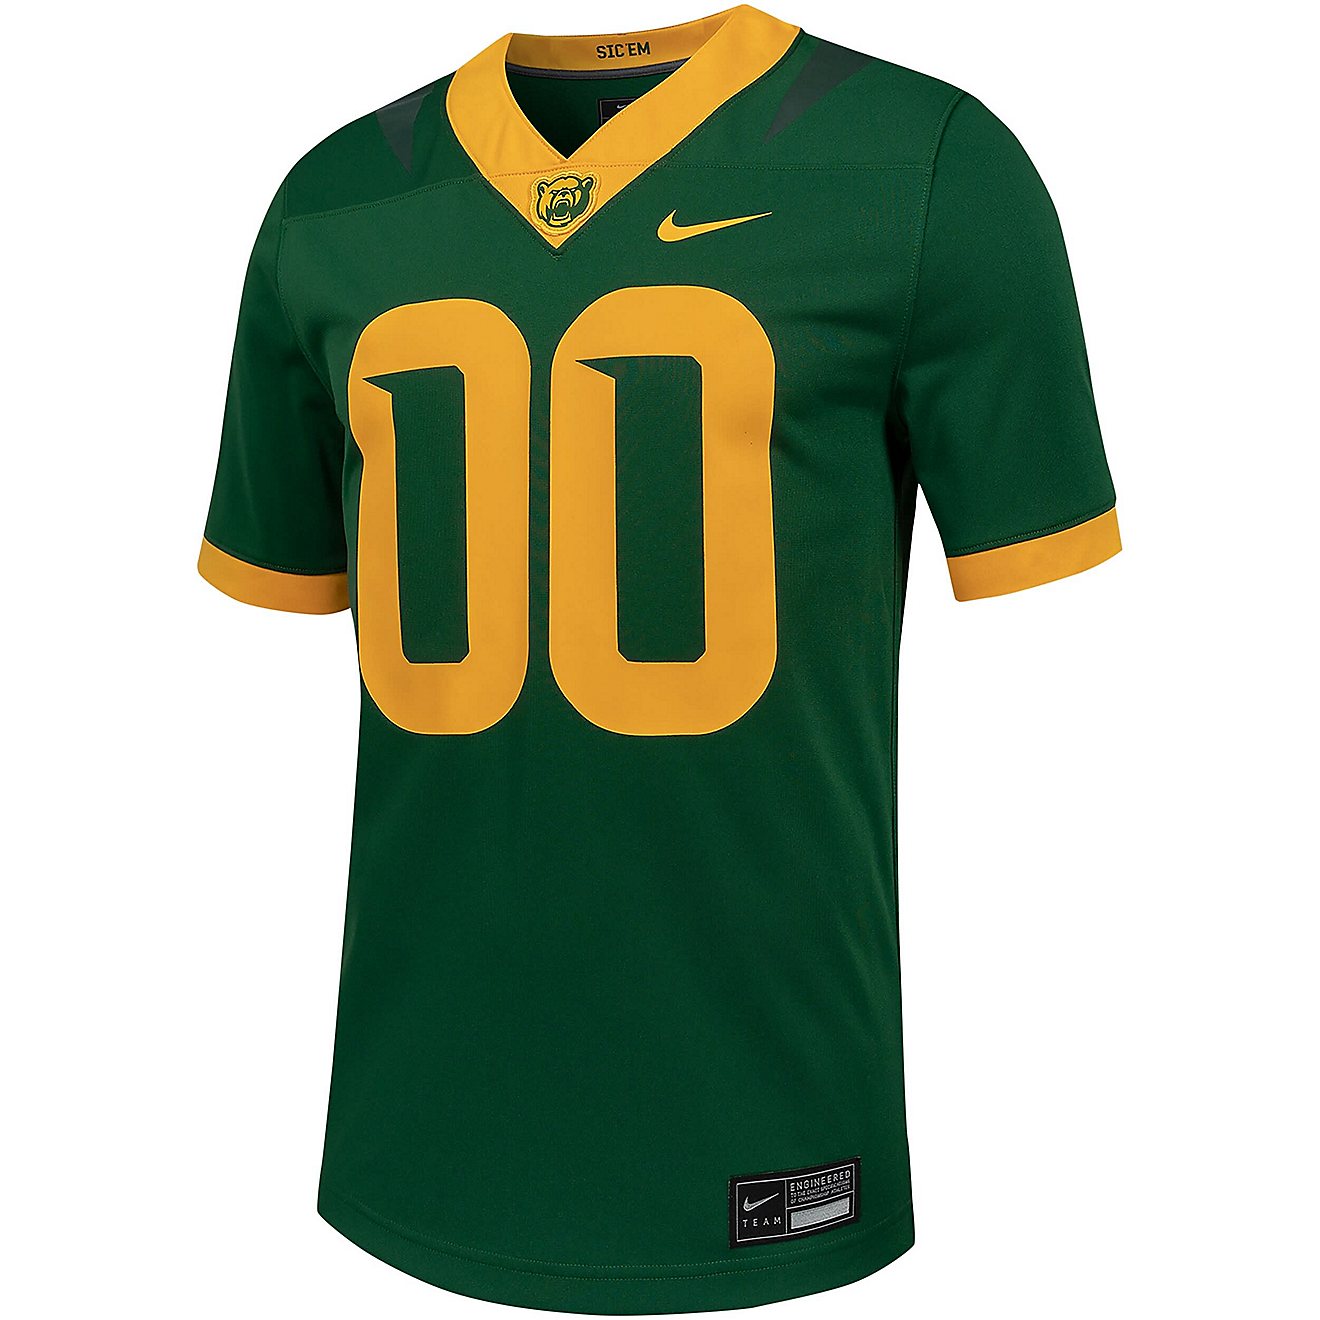 Nike 00 Baylor Bears Untouchable Football Replica Jersey                                                                         - view number 2